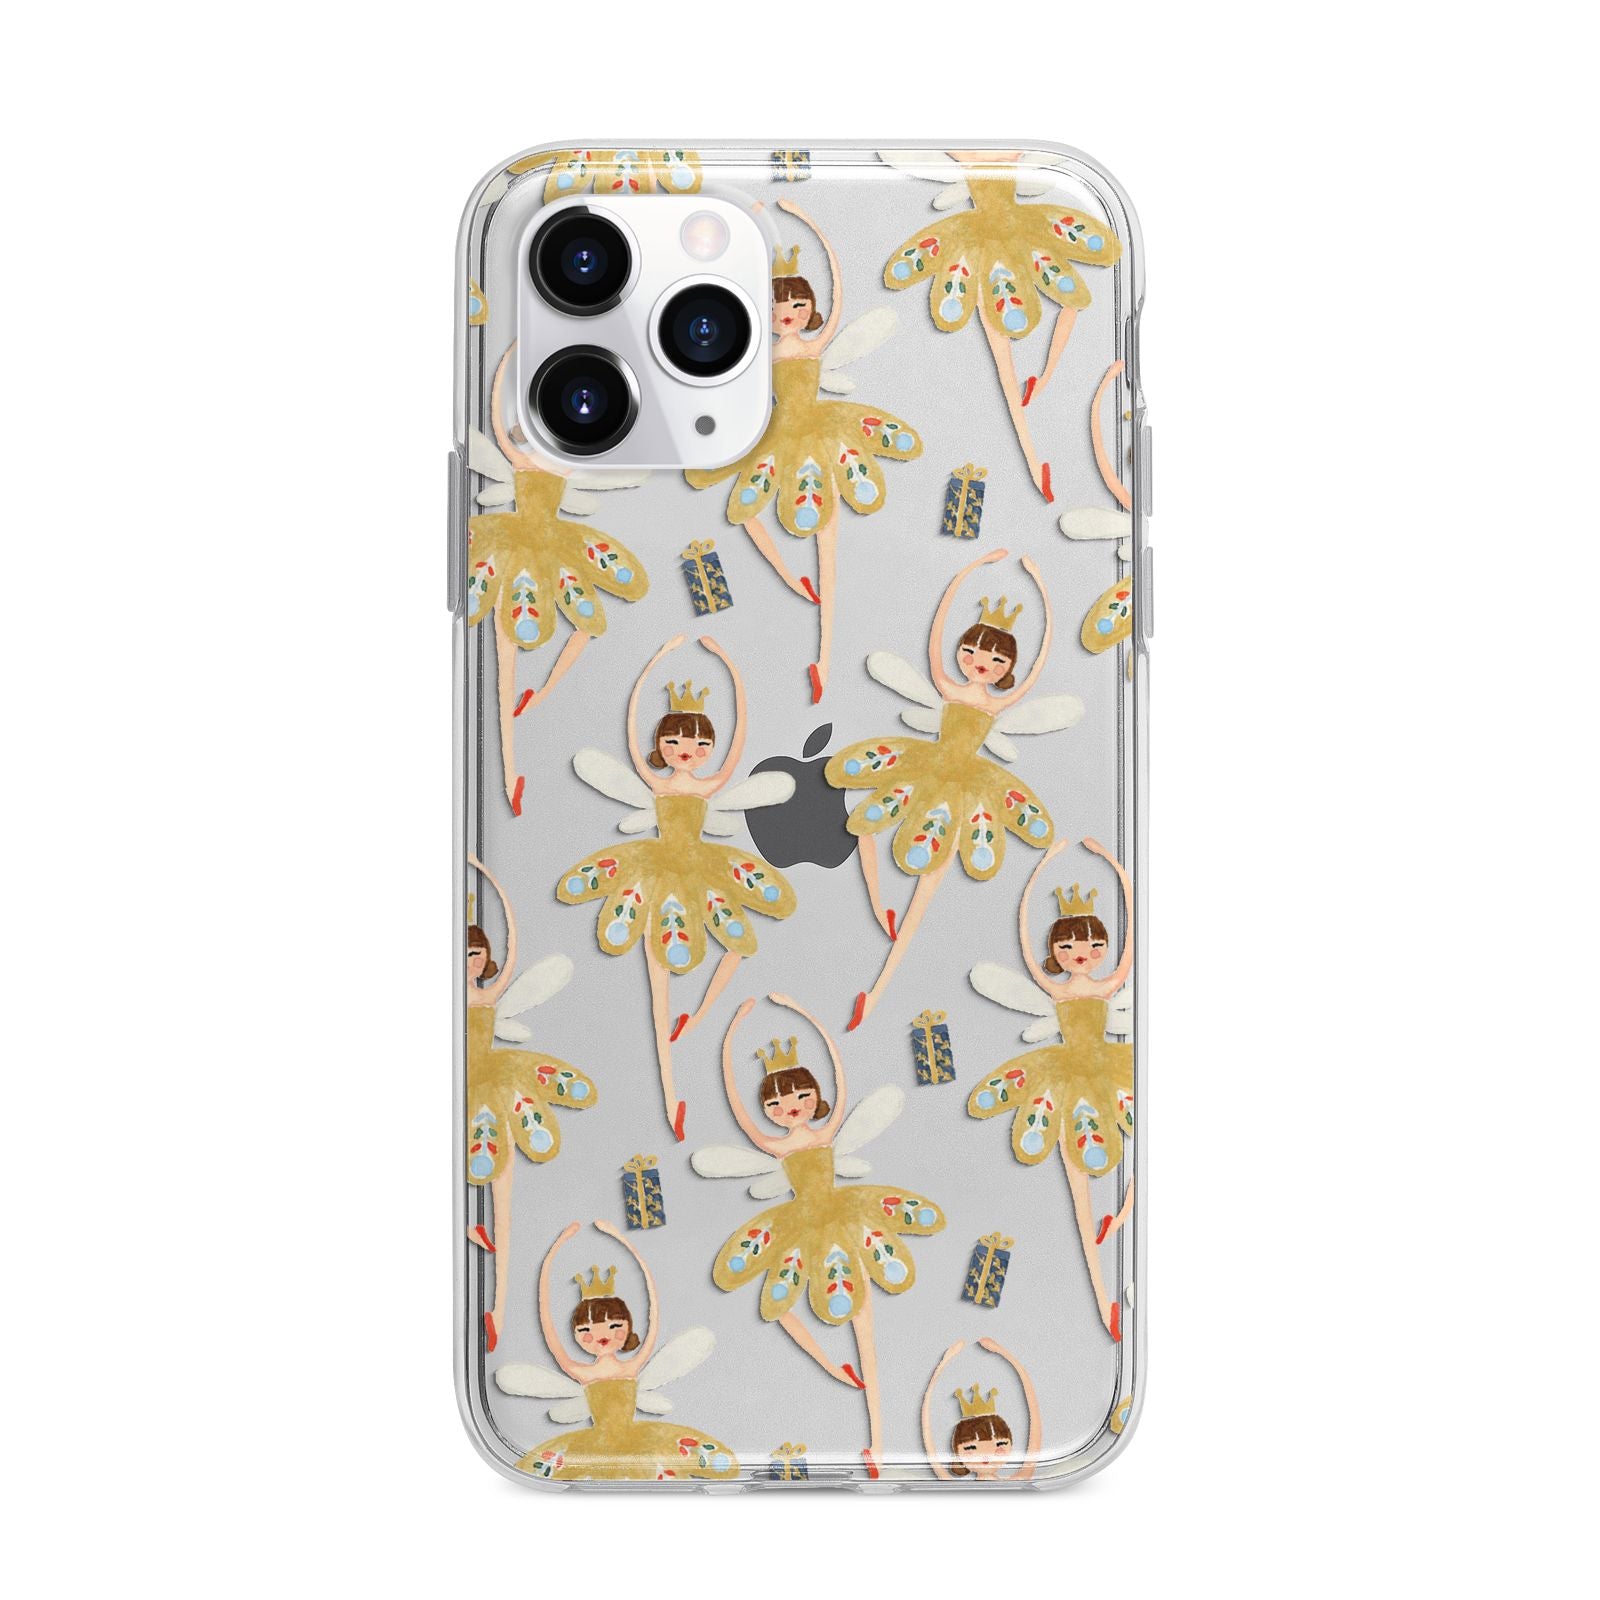 Dancing ballerina princess Apple iPhone 11 Pro in Silver with Bumper Case